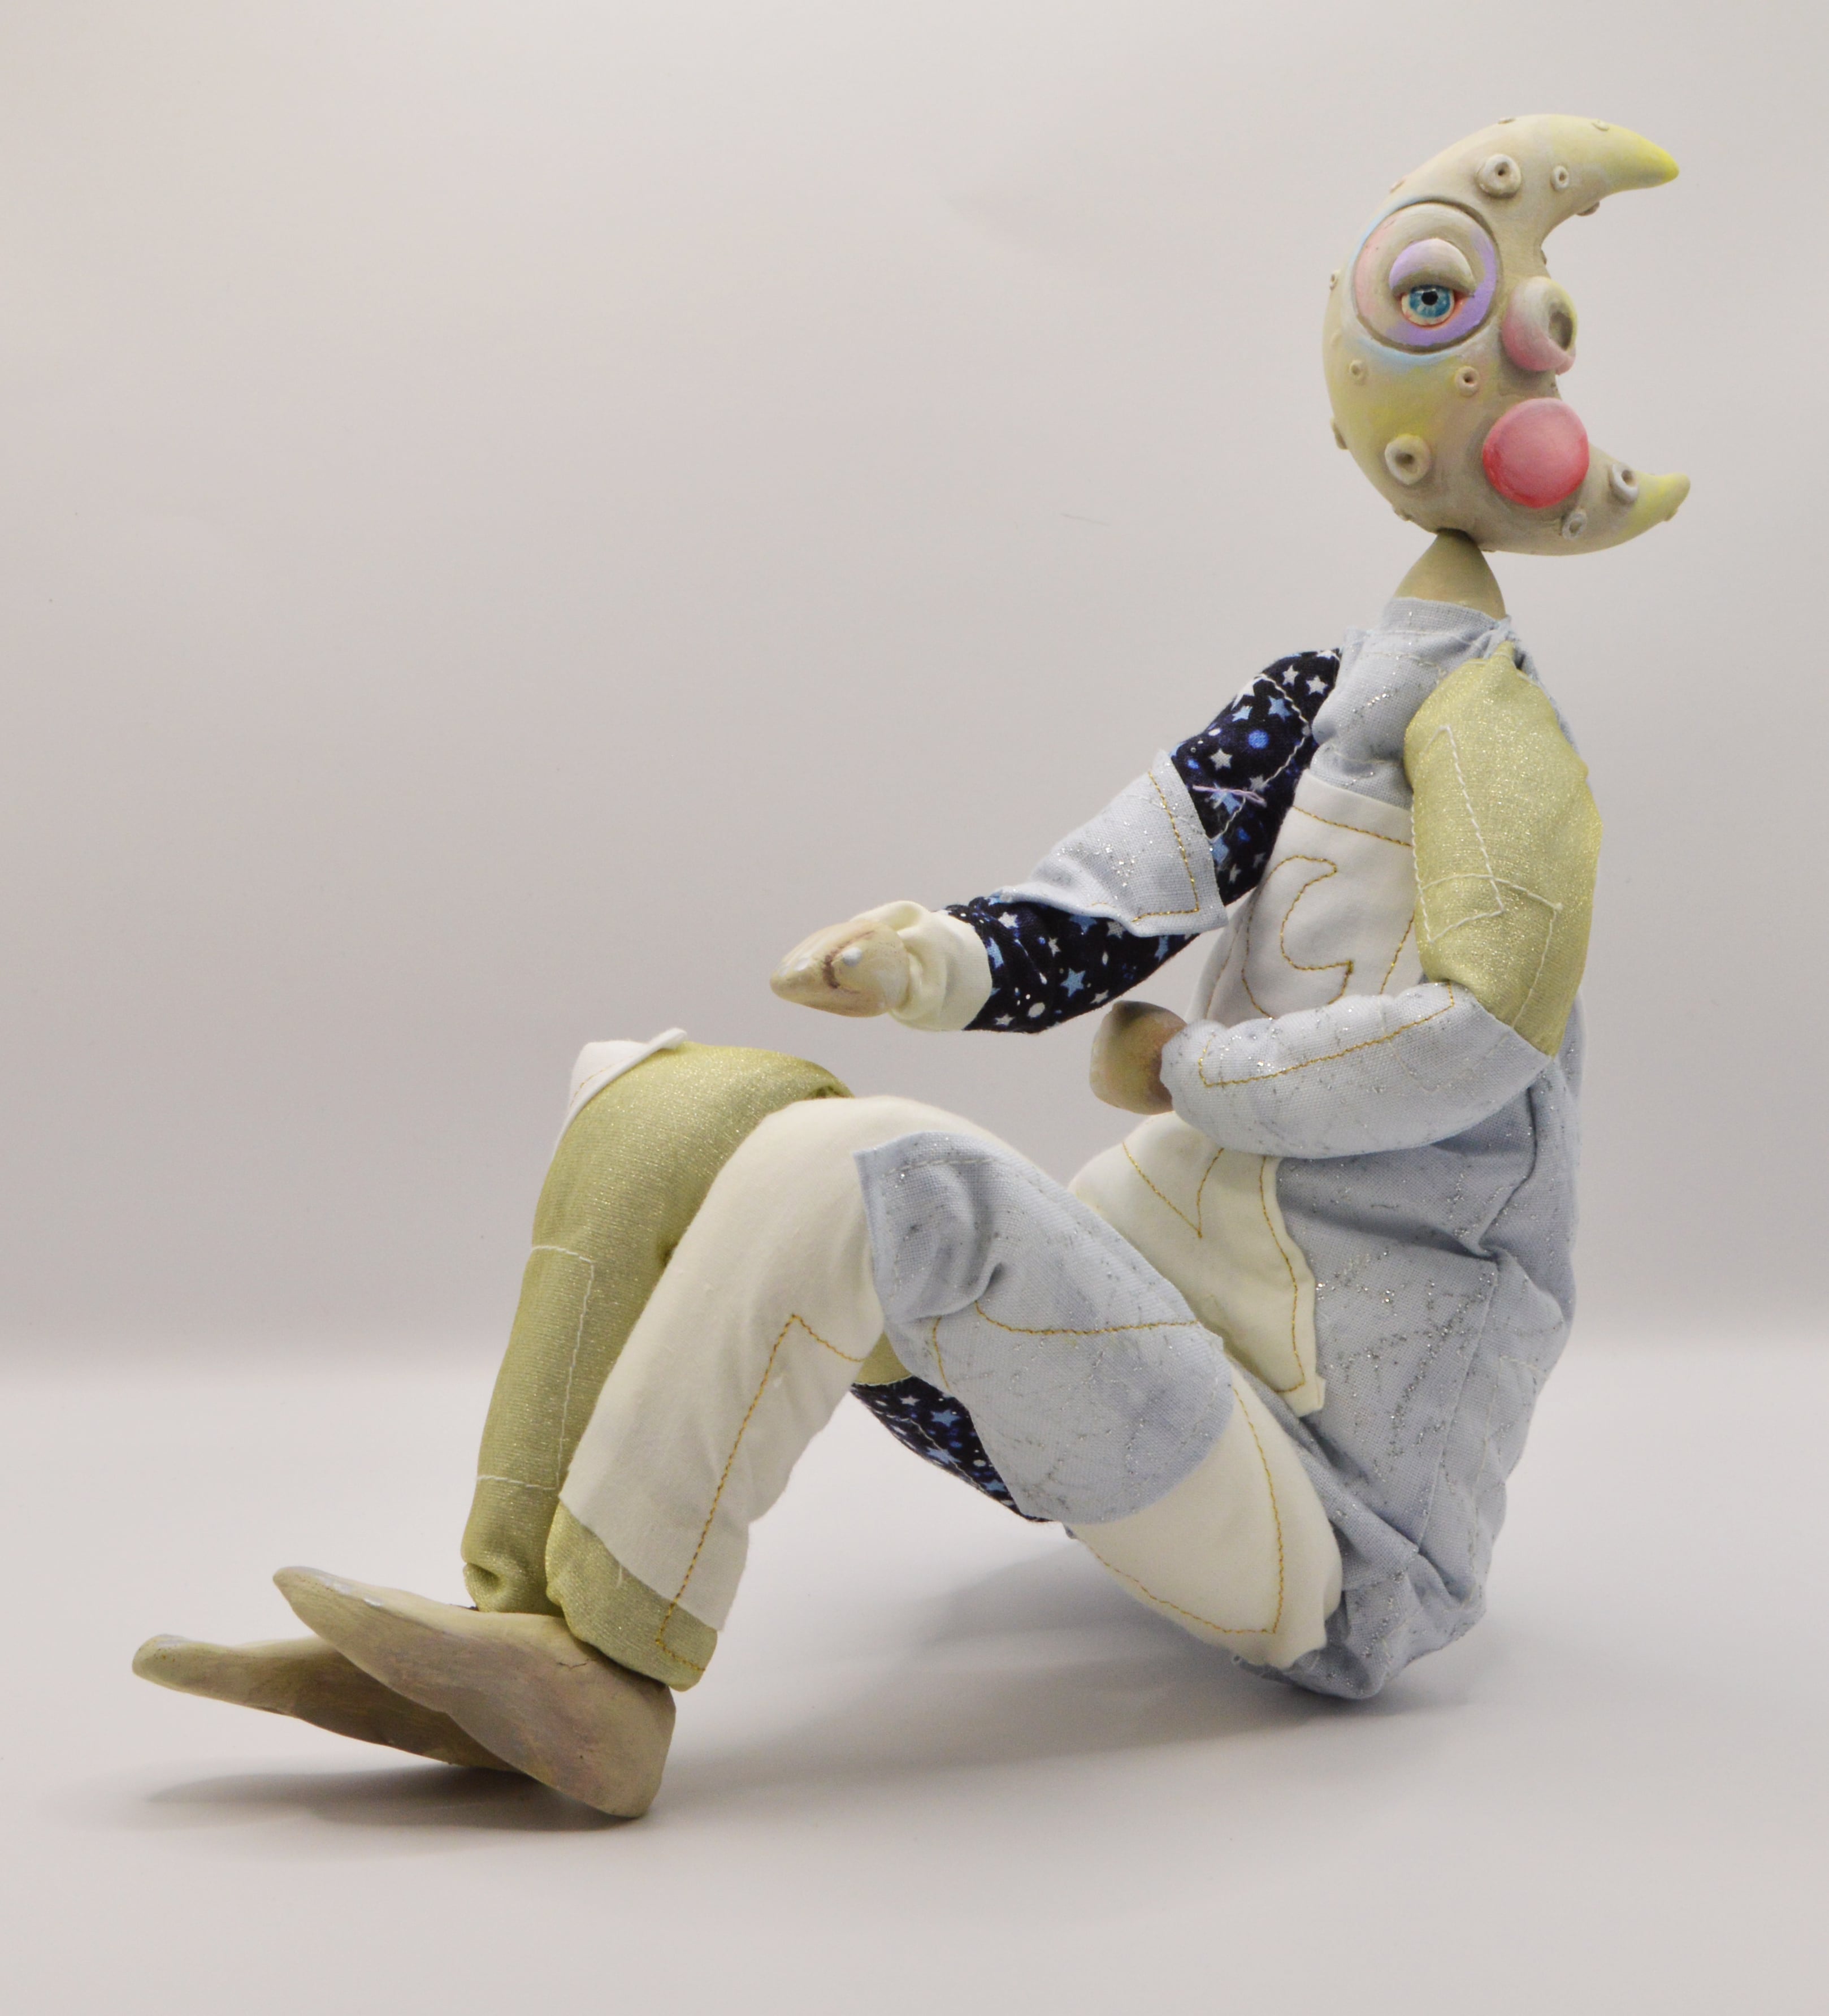 Fine Art work by Kimberley Gaskin showing a moon faced doll with a patchwork body.